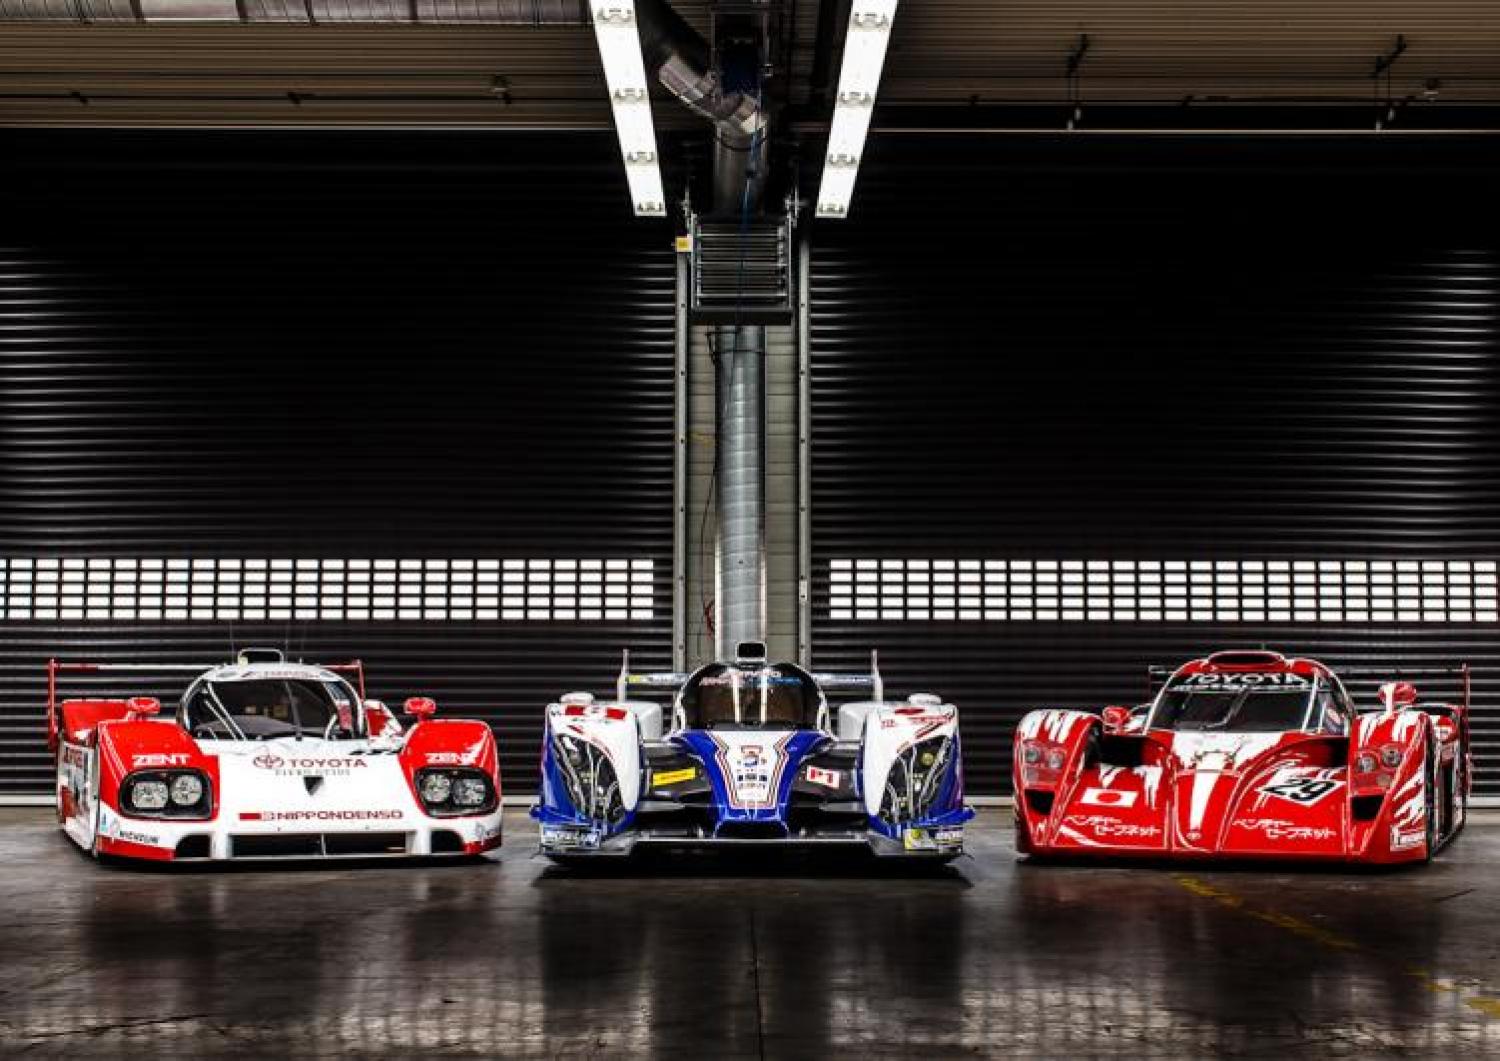 Toyota Ts010 Wallpapers